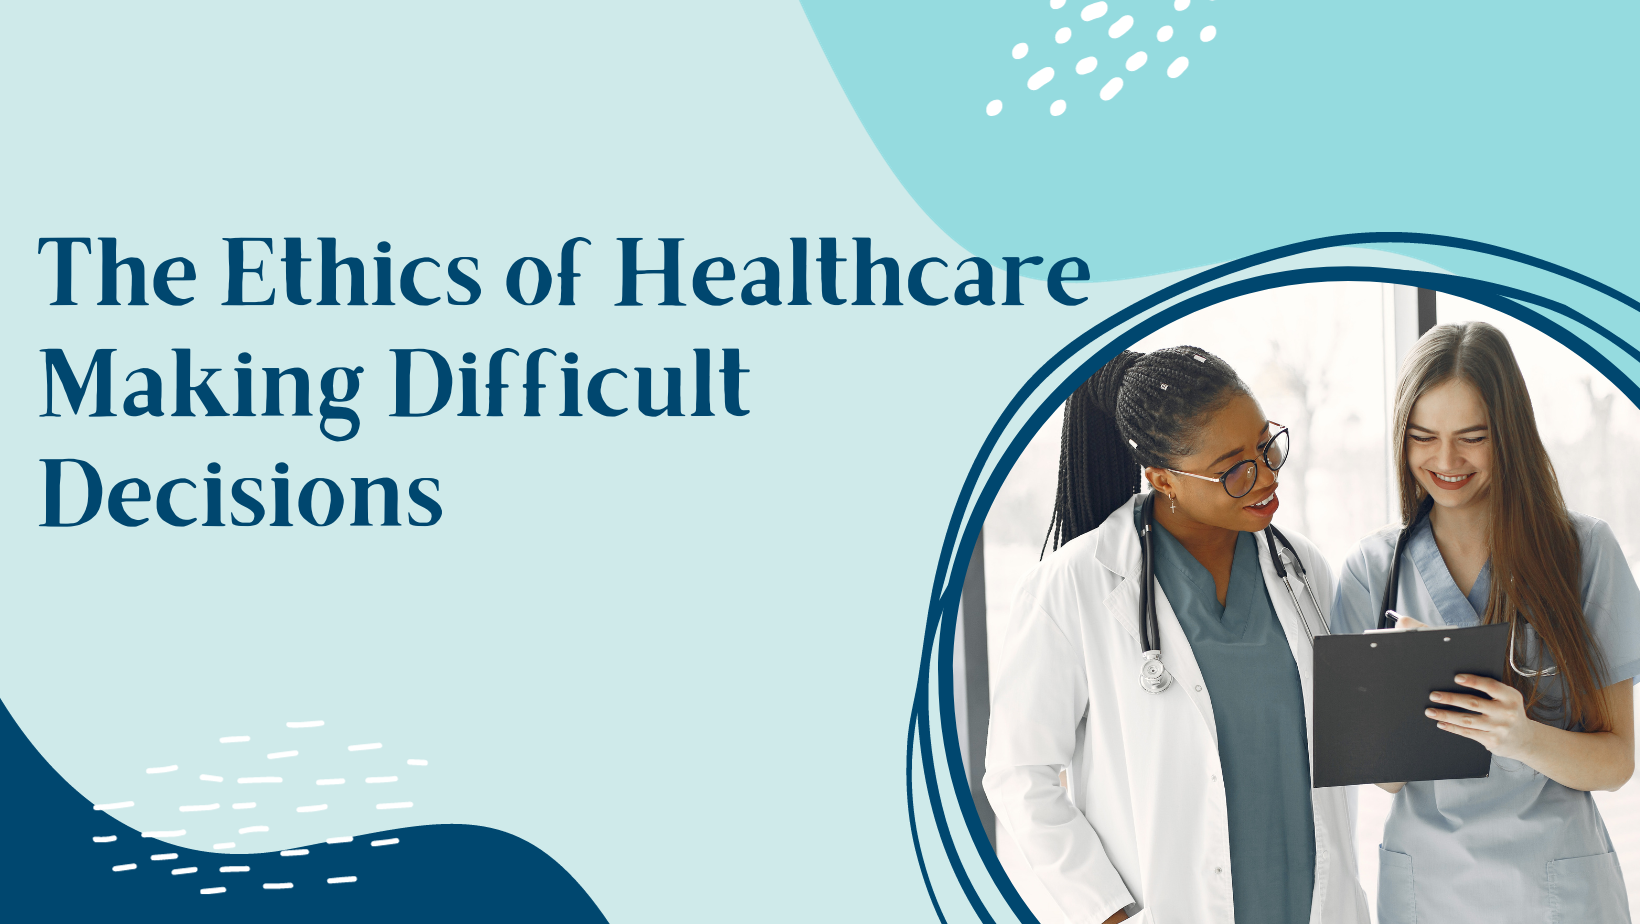 The Ethics of Healthcare: Making Difficult Decisions